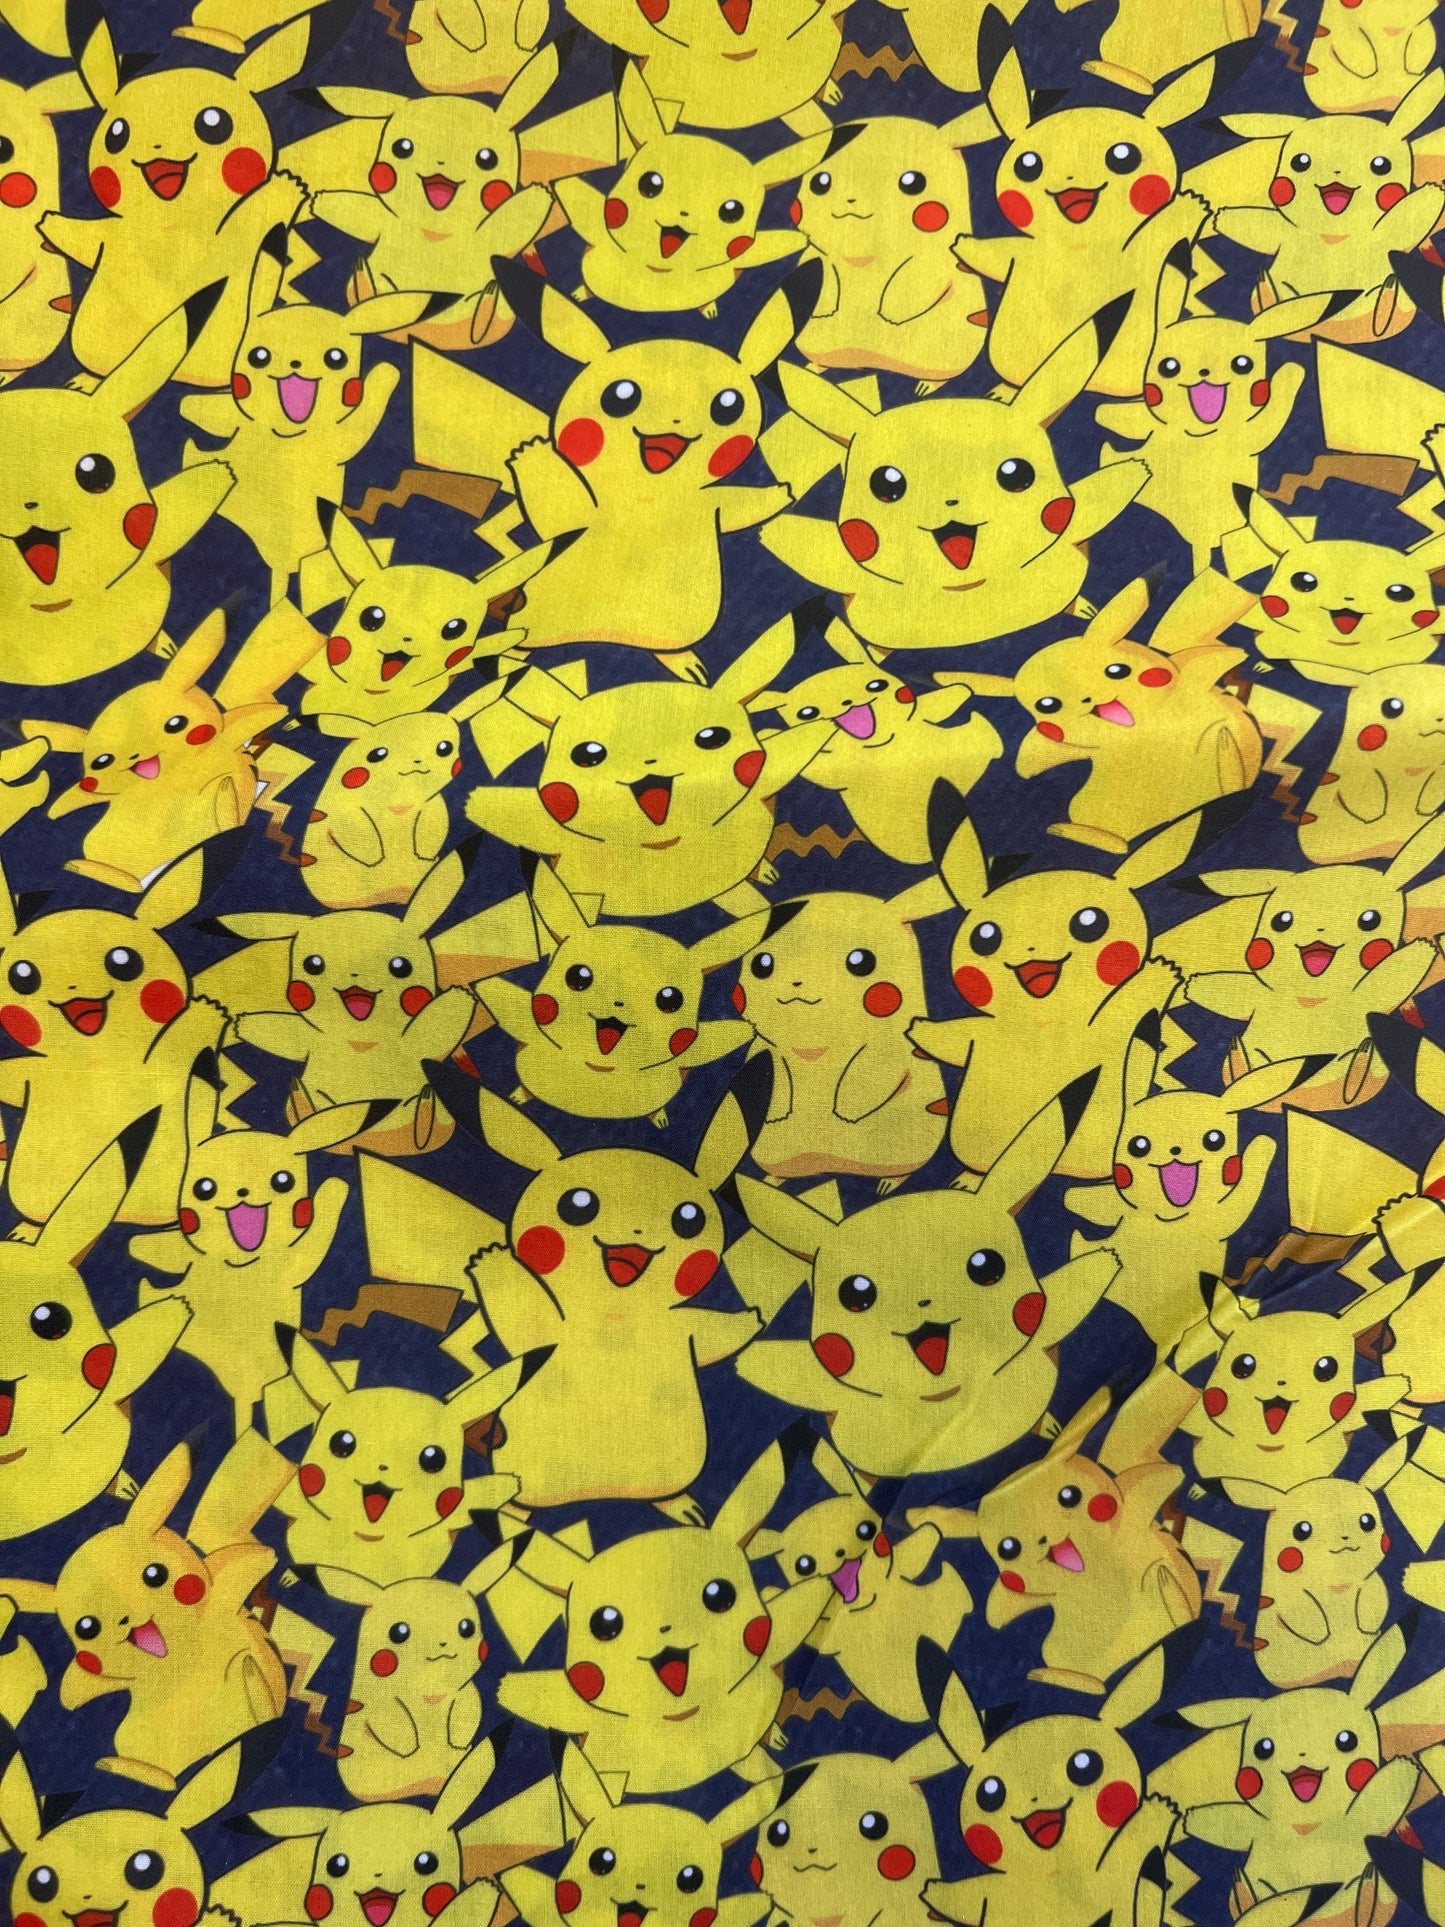 PIKACHU PARTY  - Polycotton Fabric from Japan